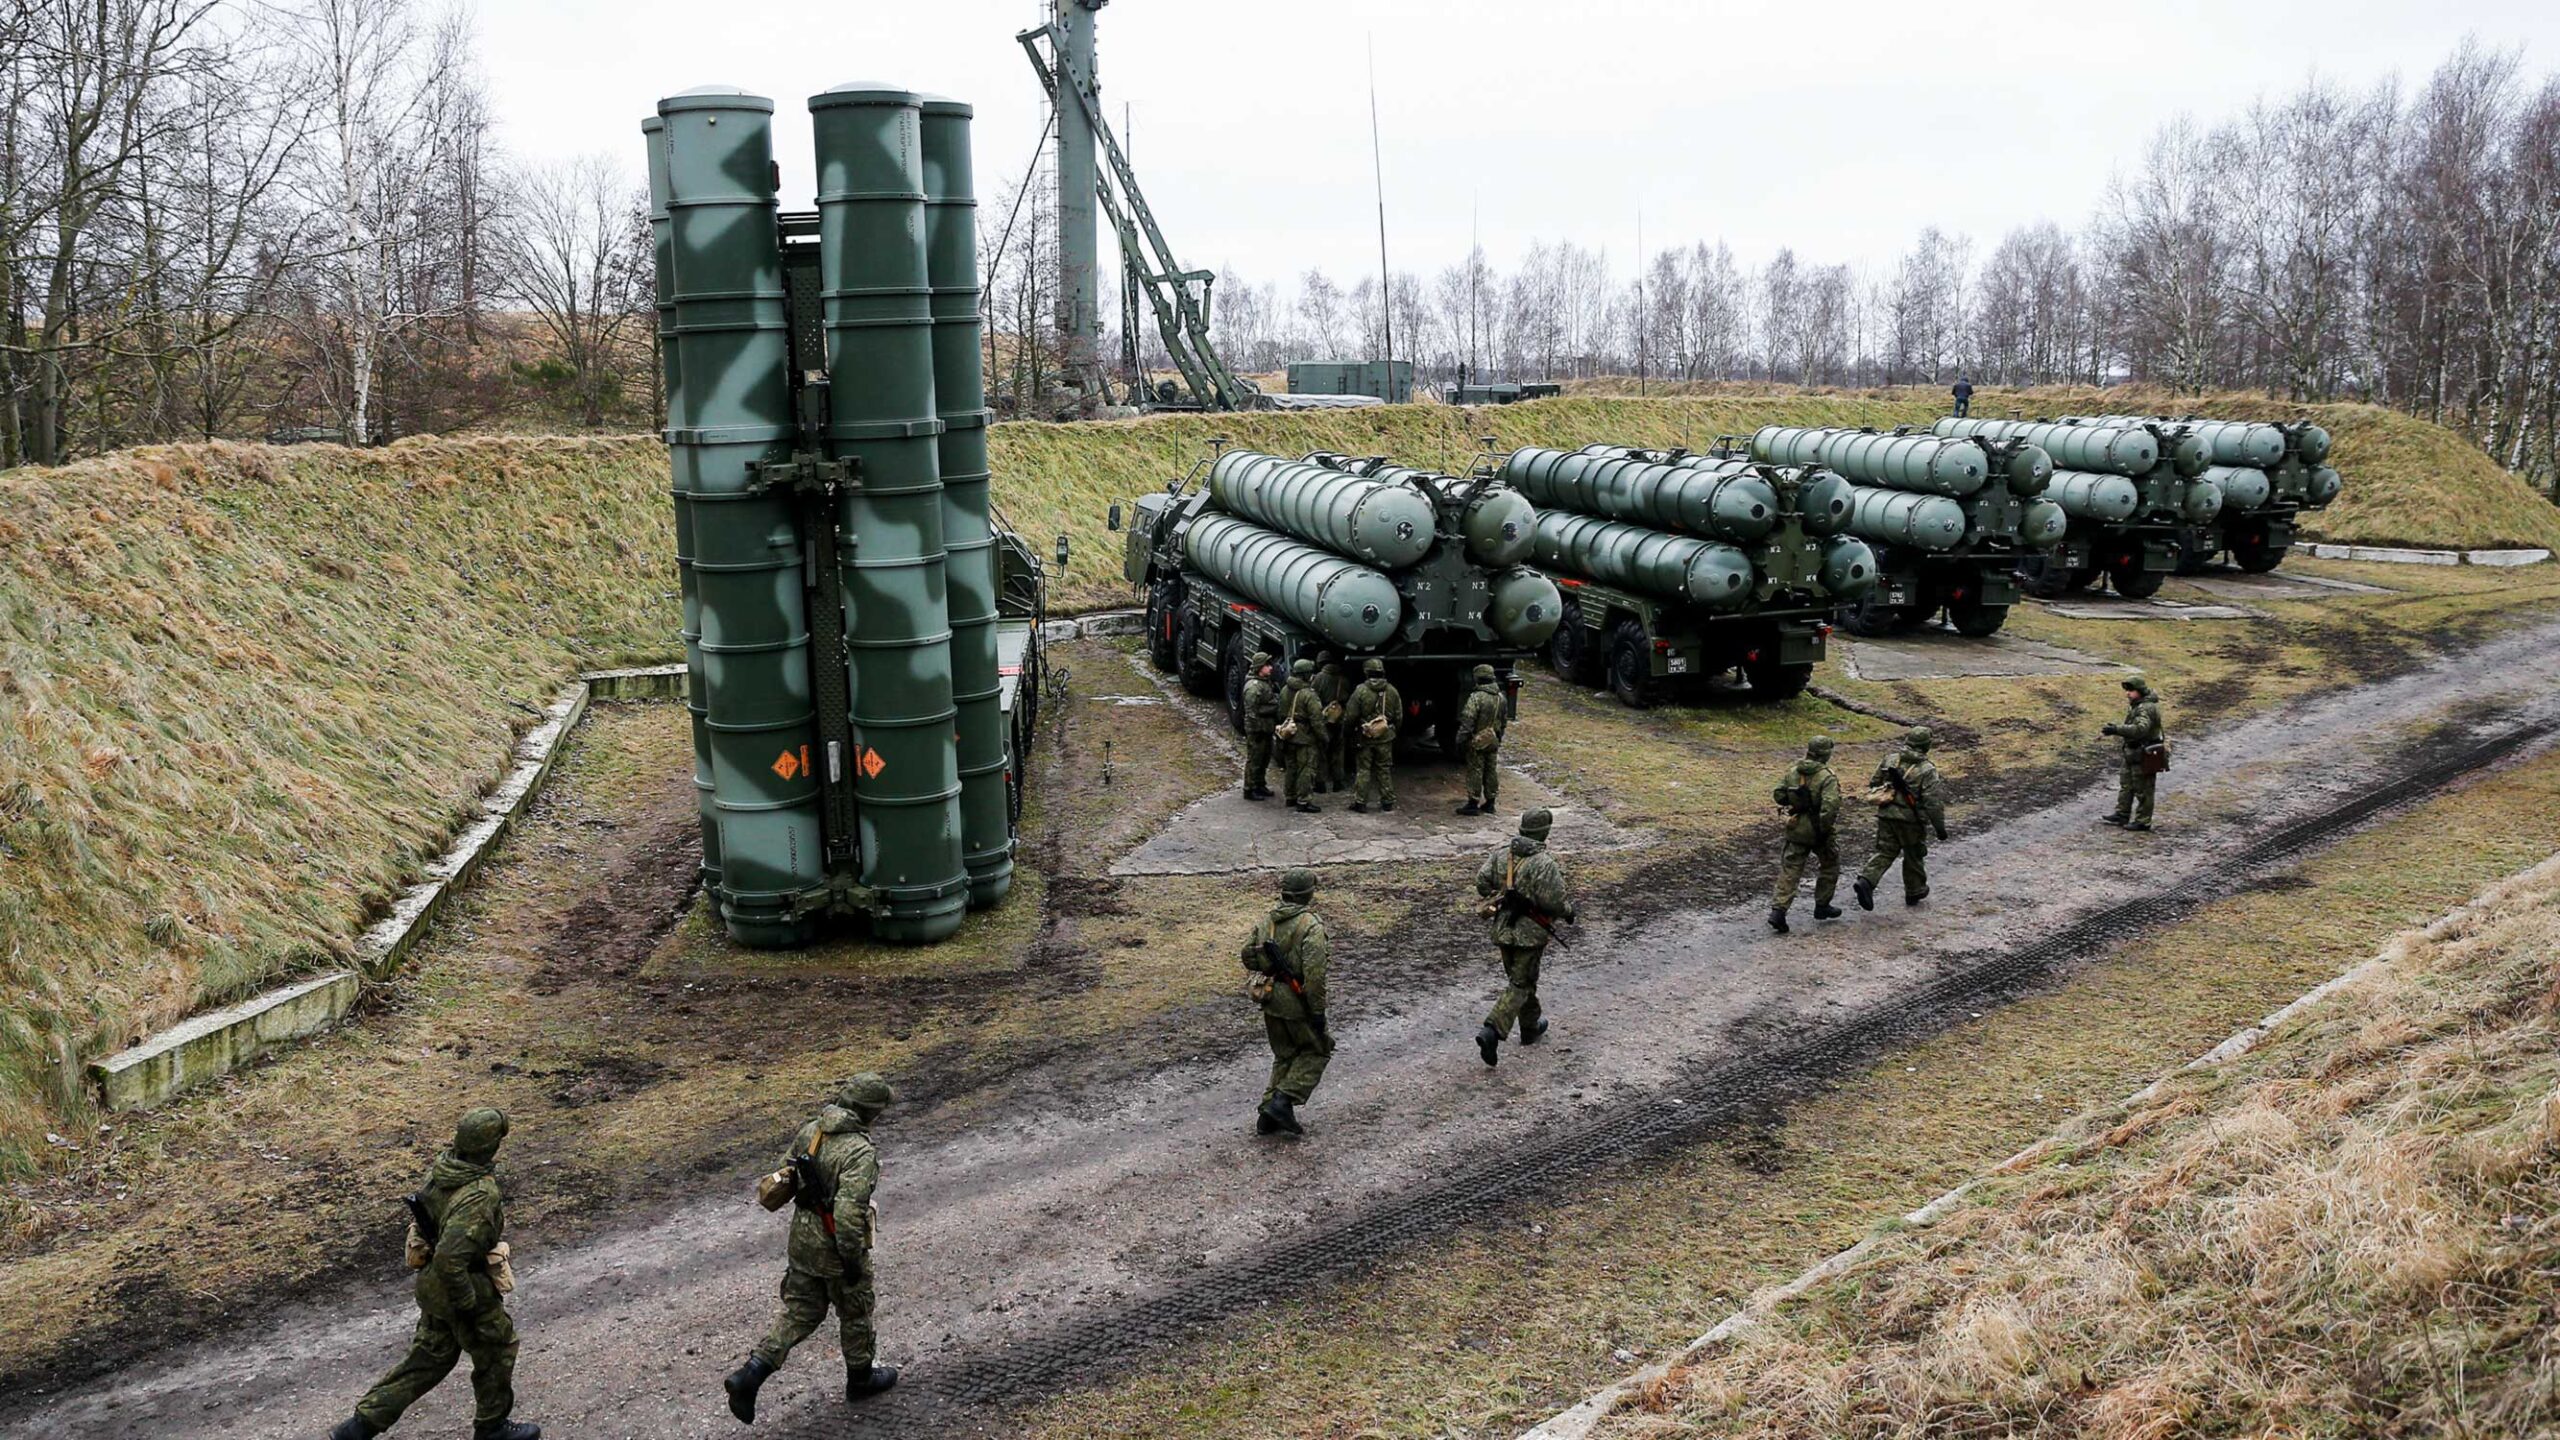 India Receives 3rd Squadron Of S-400 Missile System From Russia